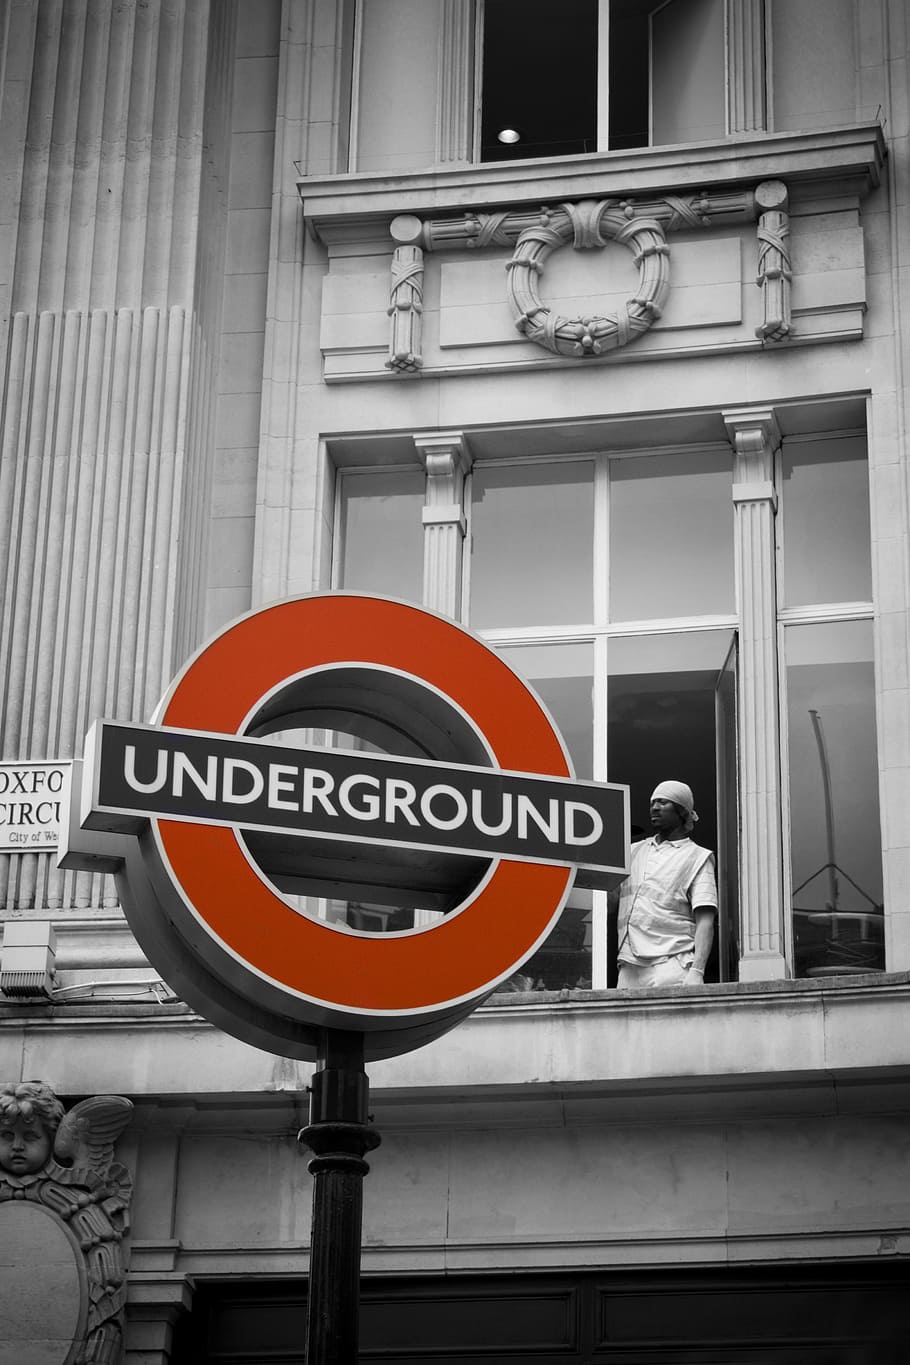 underground, london, communication, building exterior, built structure, sign, architecture, text, day, one person